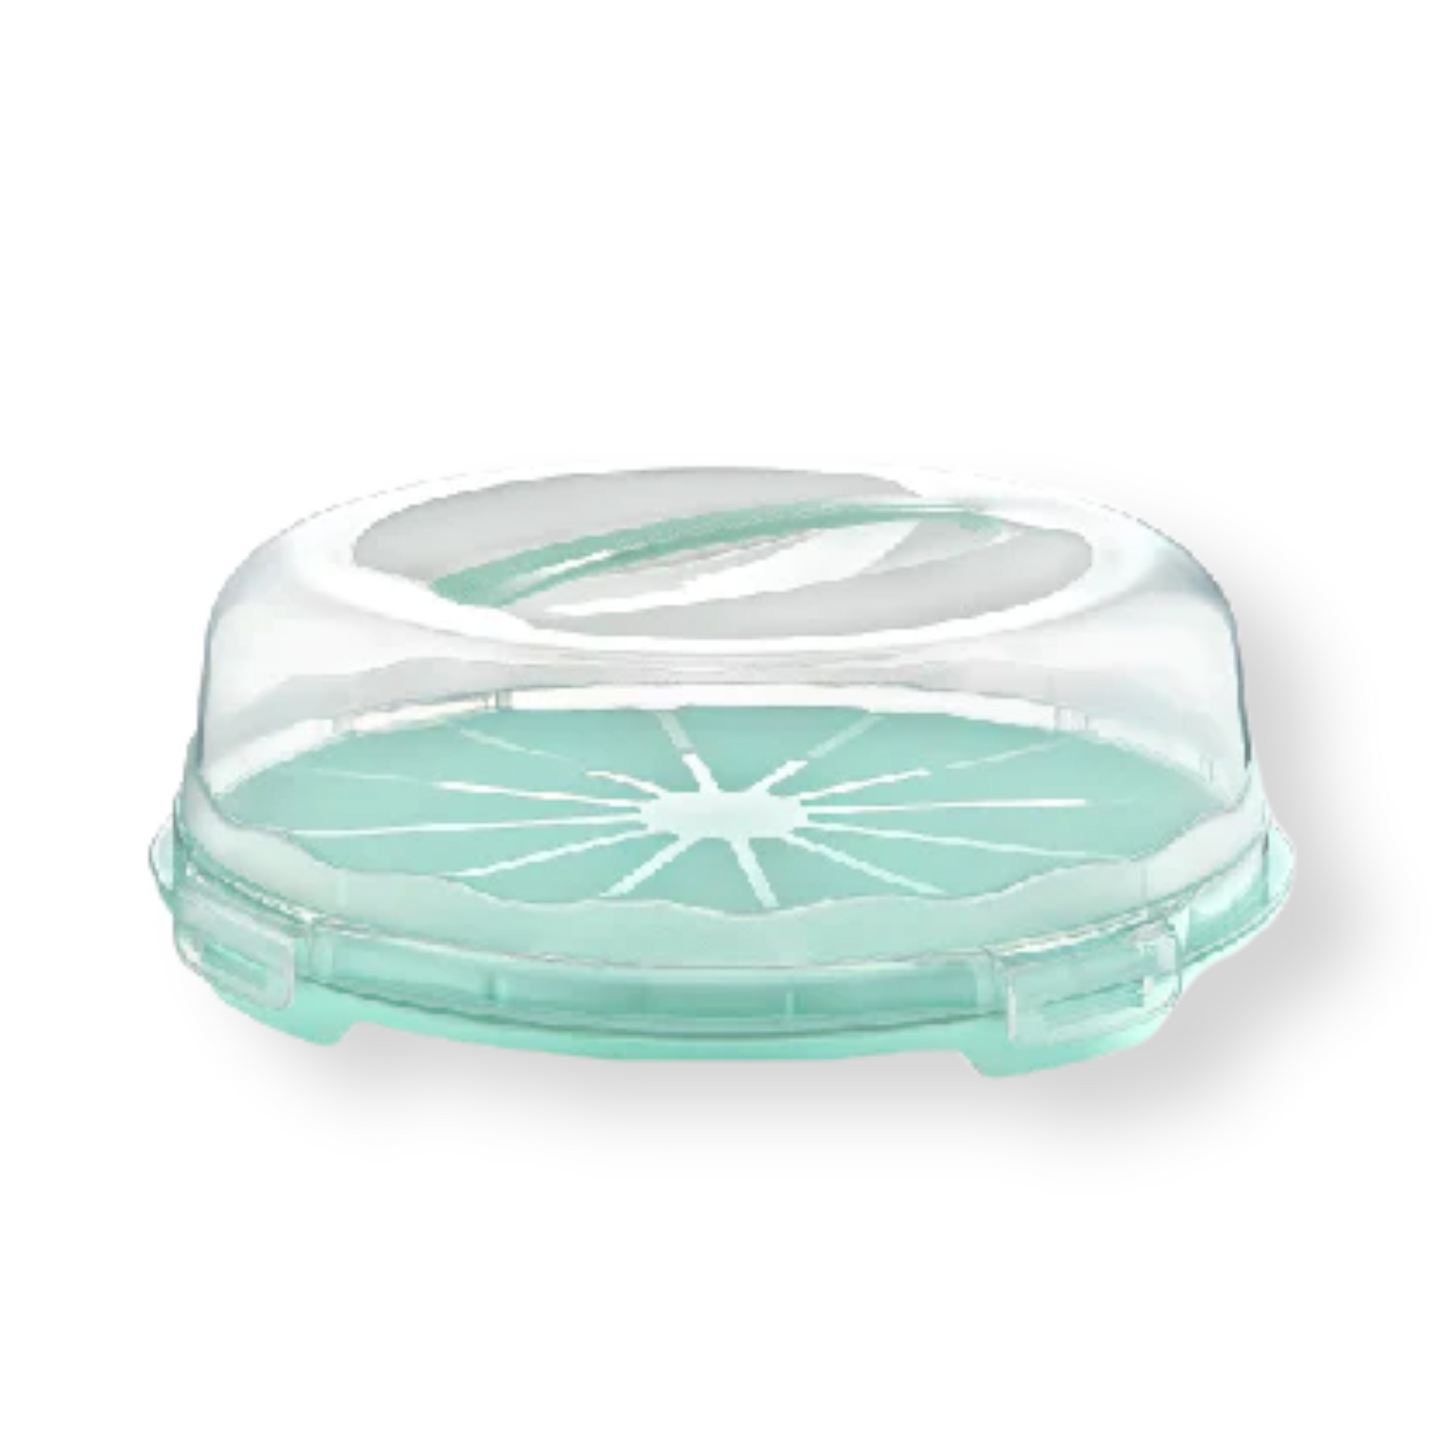 Low Pastry Carrier with Lid - Lunaz Shop